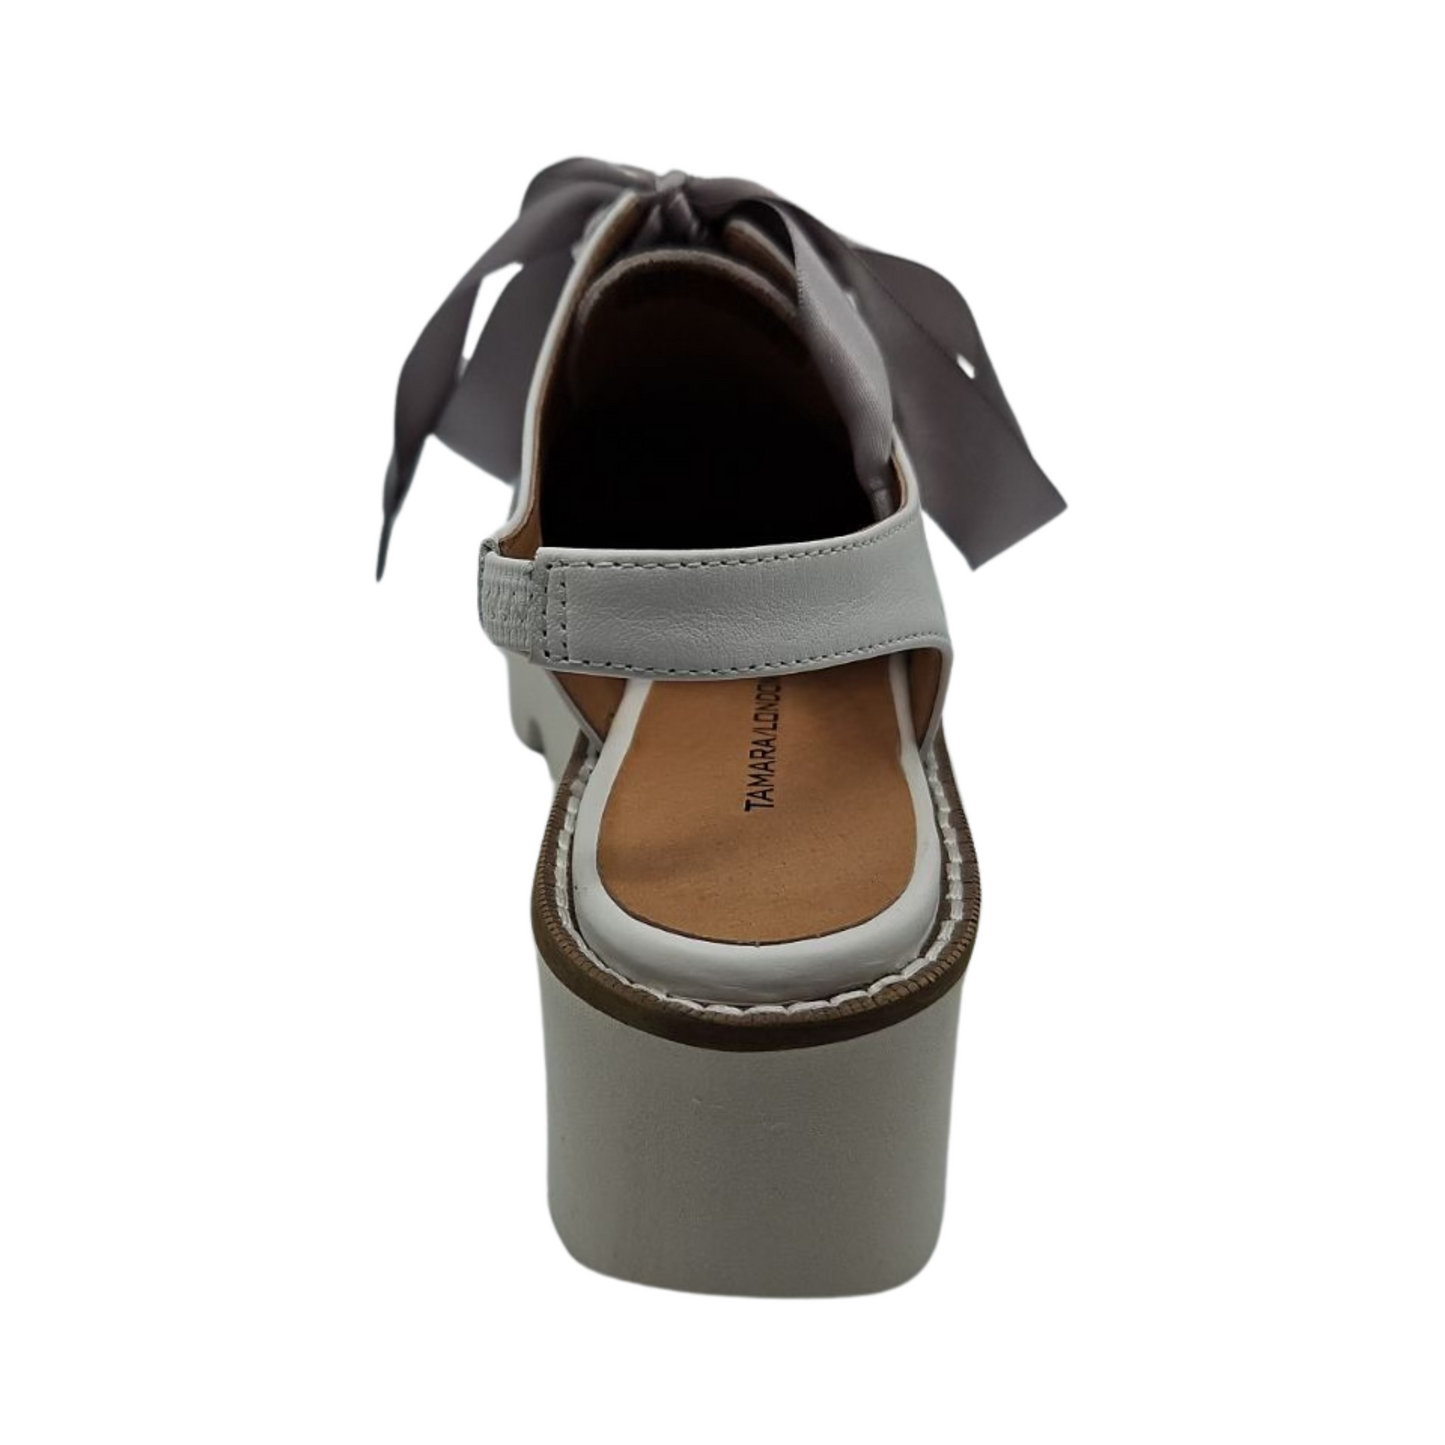 Back view of dove grey suede oxfords with shiny silver polka dots. Featuring satin ribbon laces, slingback strap and chunky white platform sole.